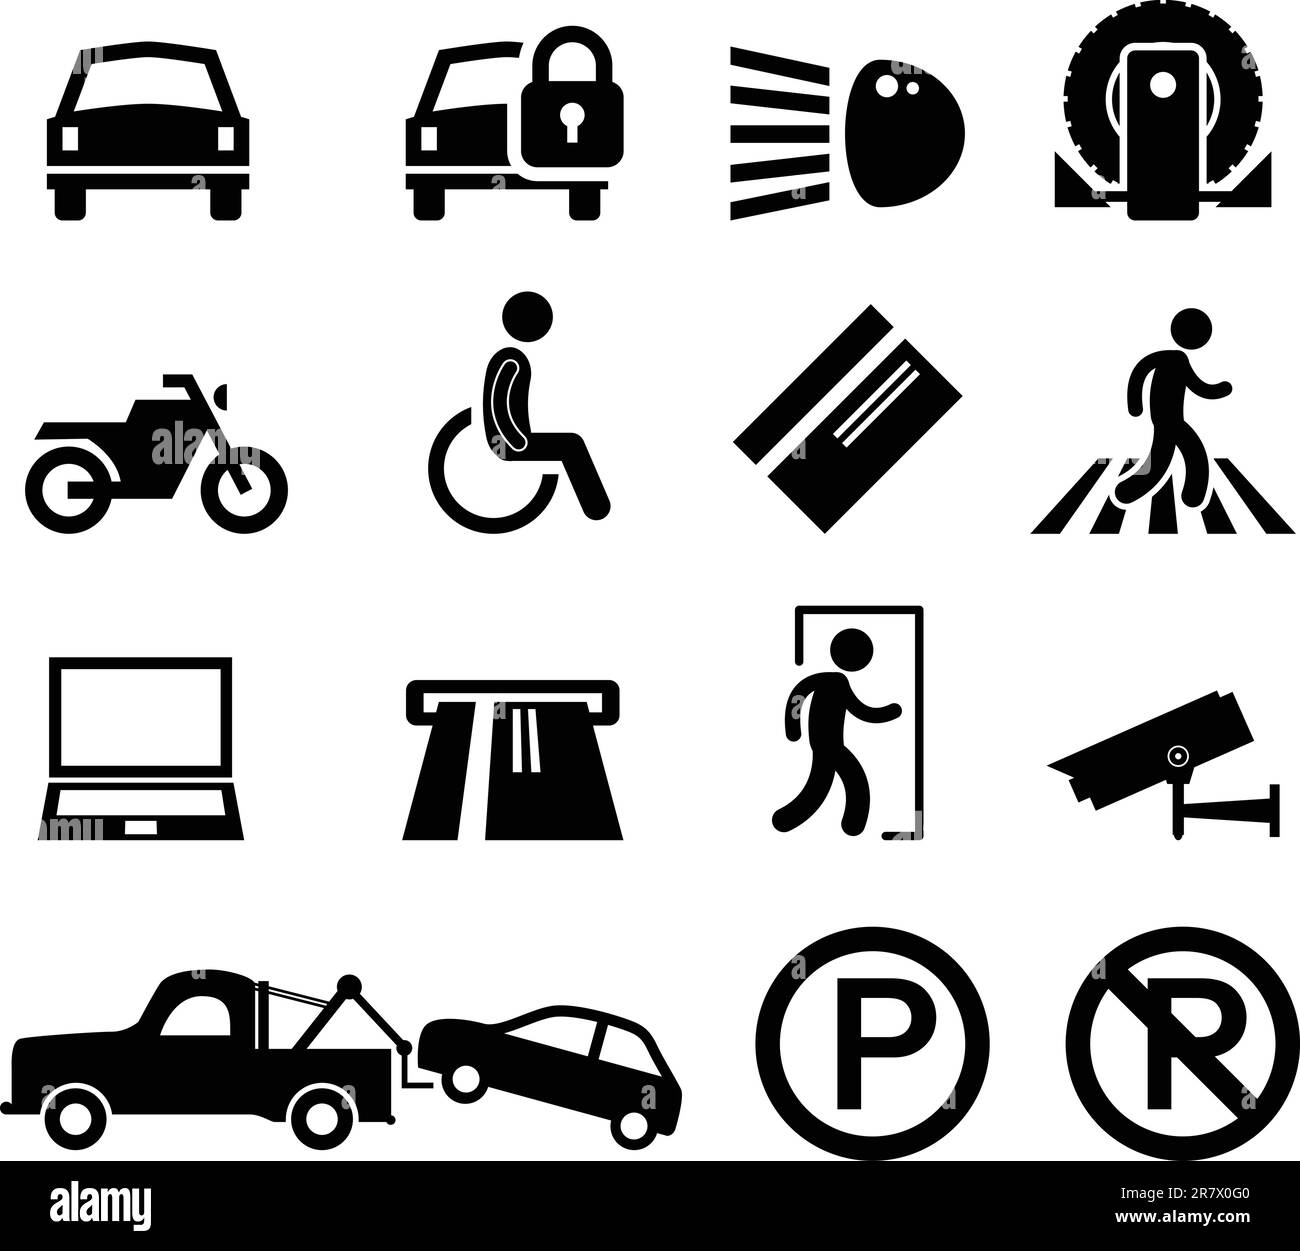 A set of car park reminder and information icons. Stock Vector